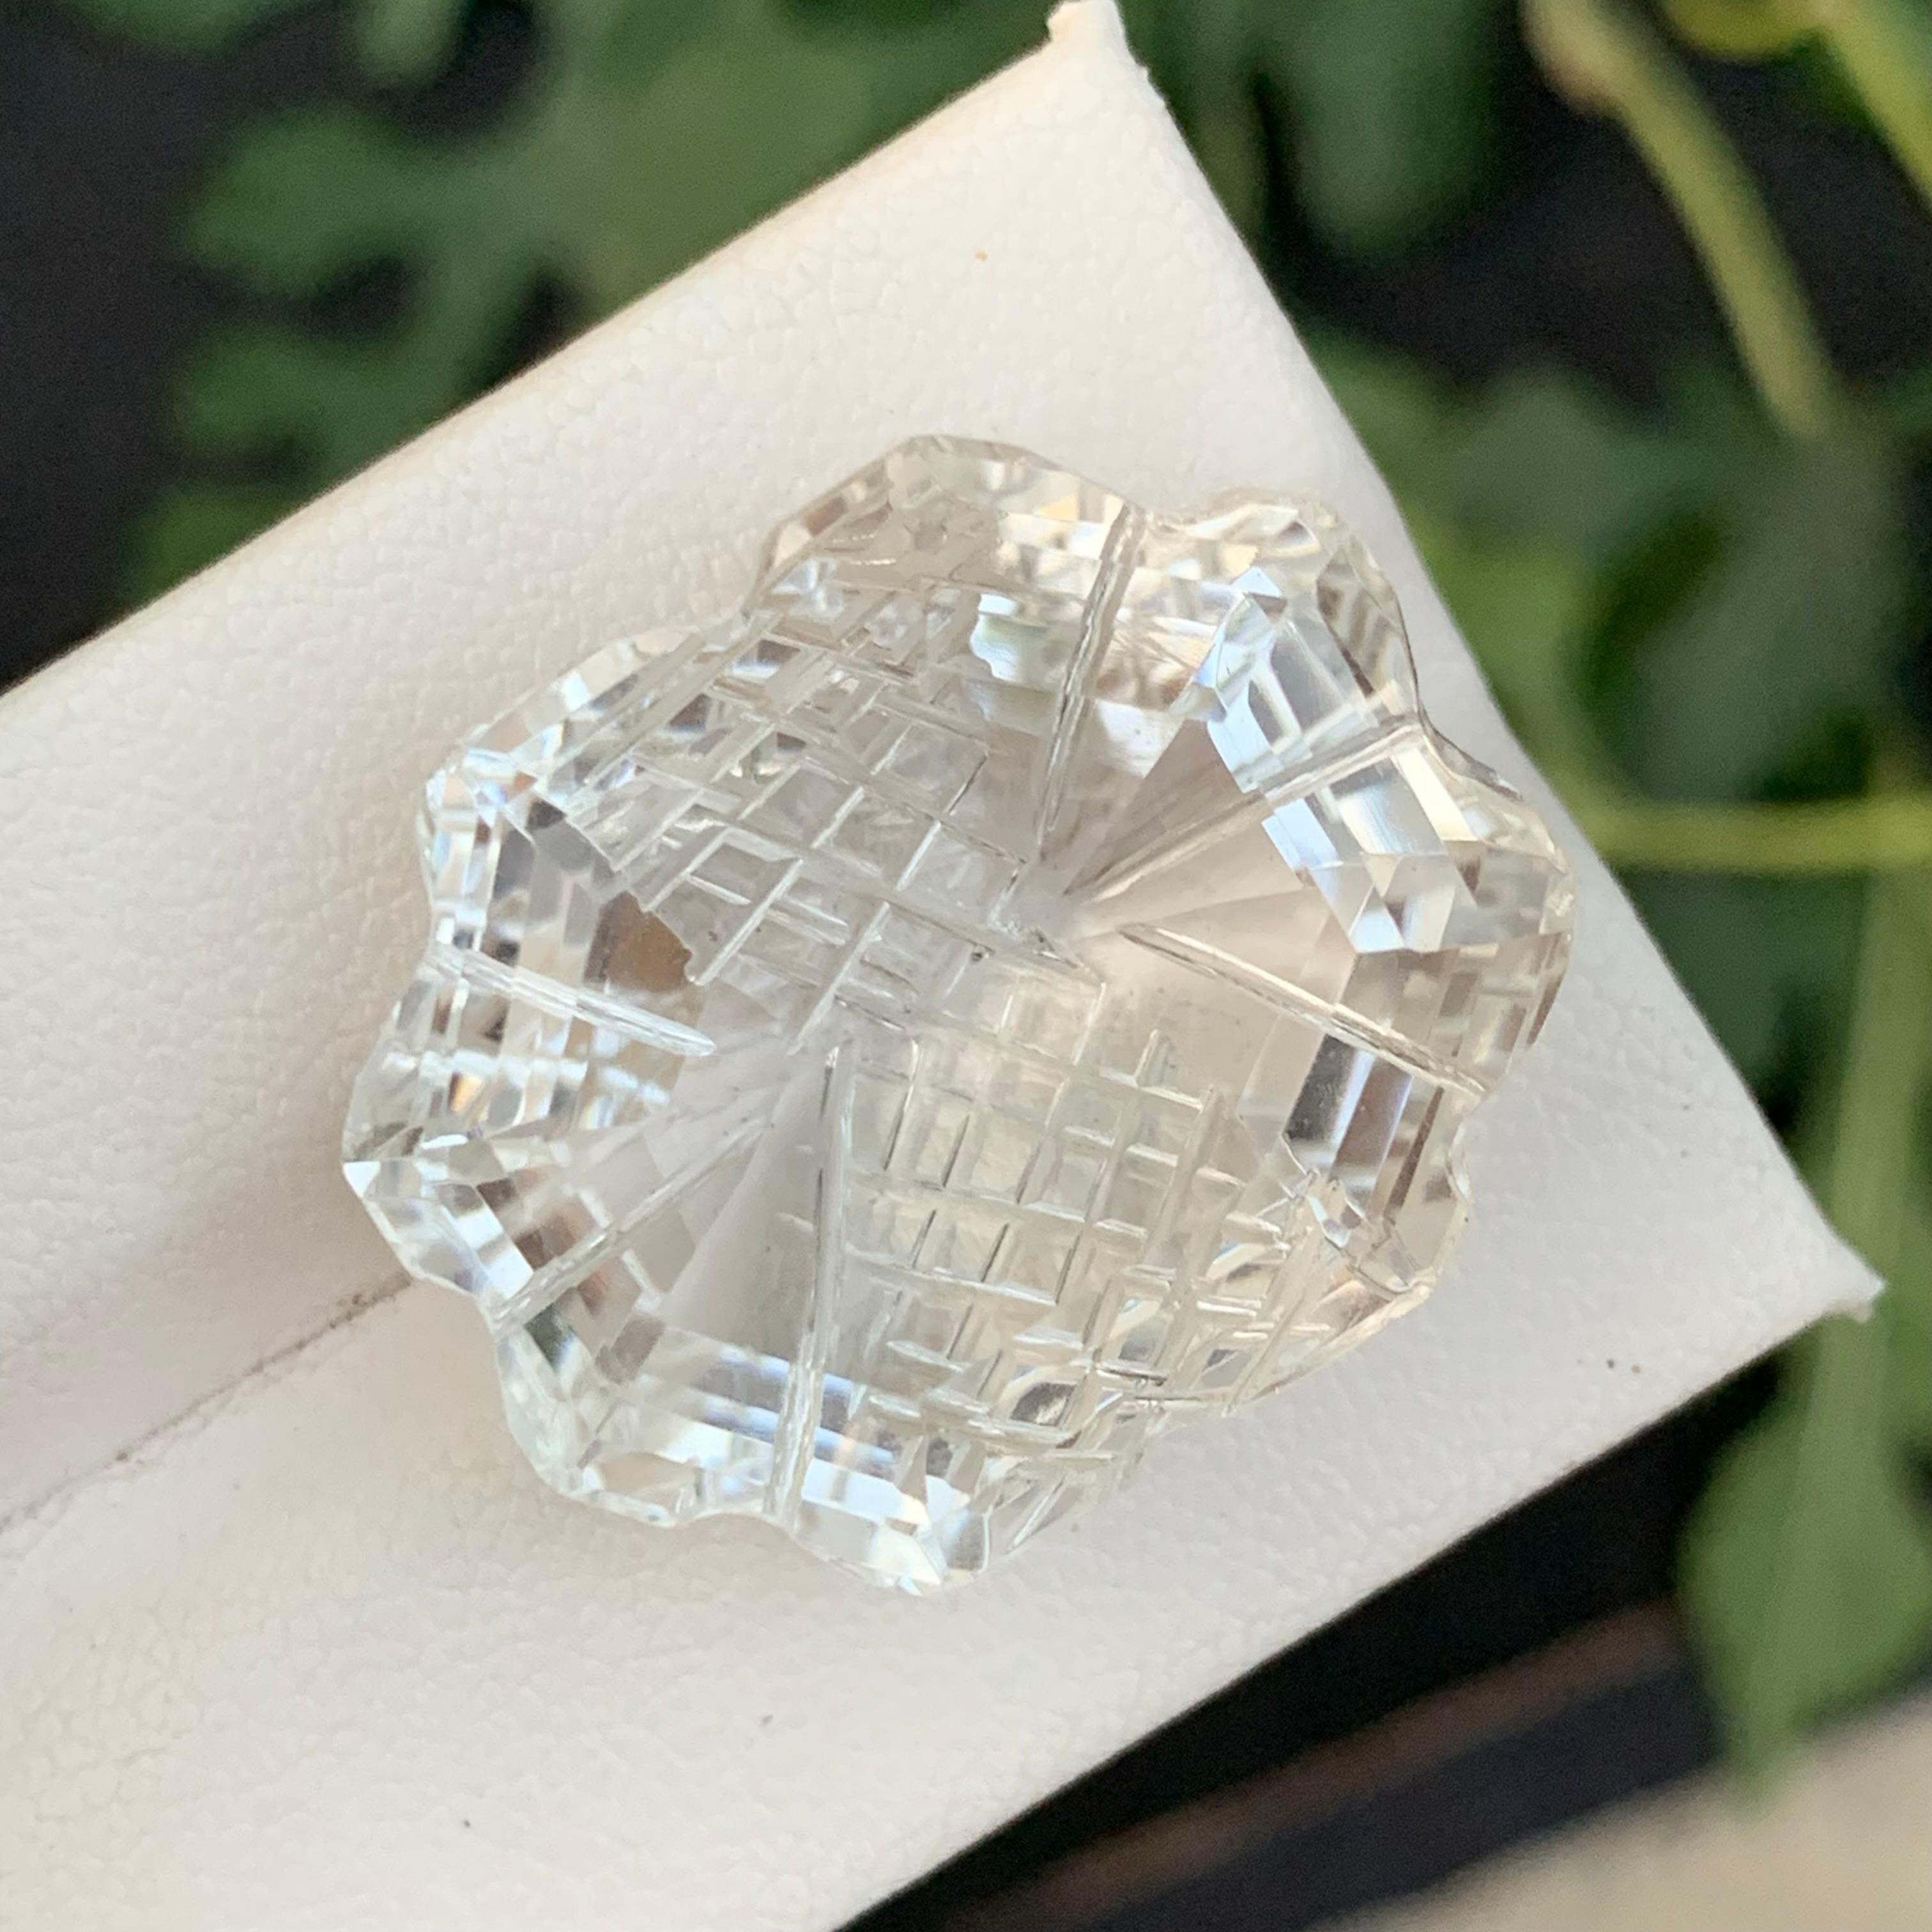 Clear Crystal Quartz
Weight: 42.80 Carats
Dimension: 24 x 21 x 13.3 Mm
Origin: Balochistan Pakistan
Color: Colorless
Shape: Carving / Polygon 
Treatment: None
Certificate: On Customer Demand
.
Clear crystal quartz, also known as rock crystal, is a